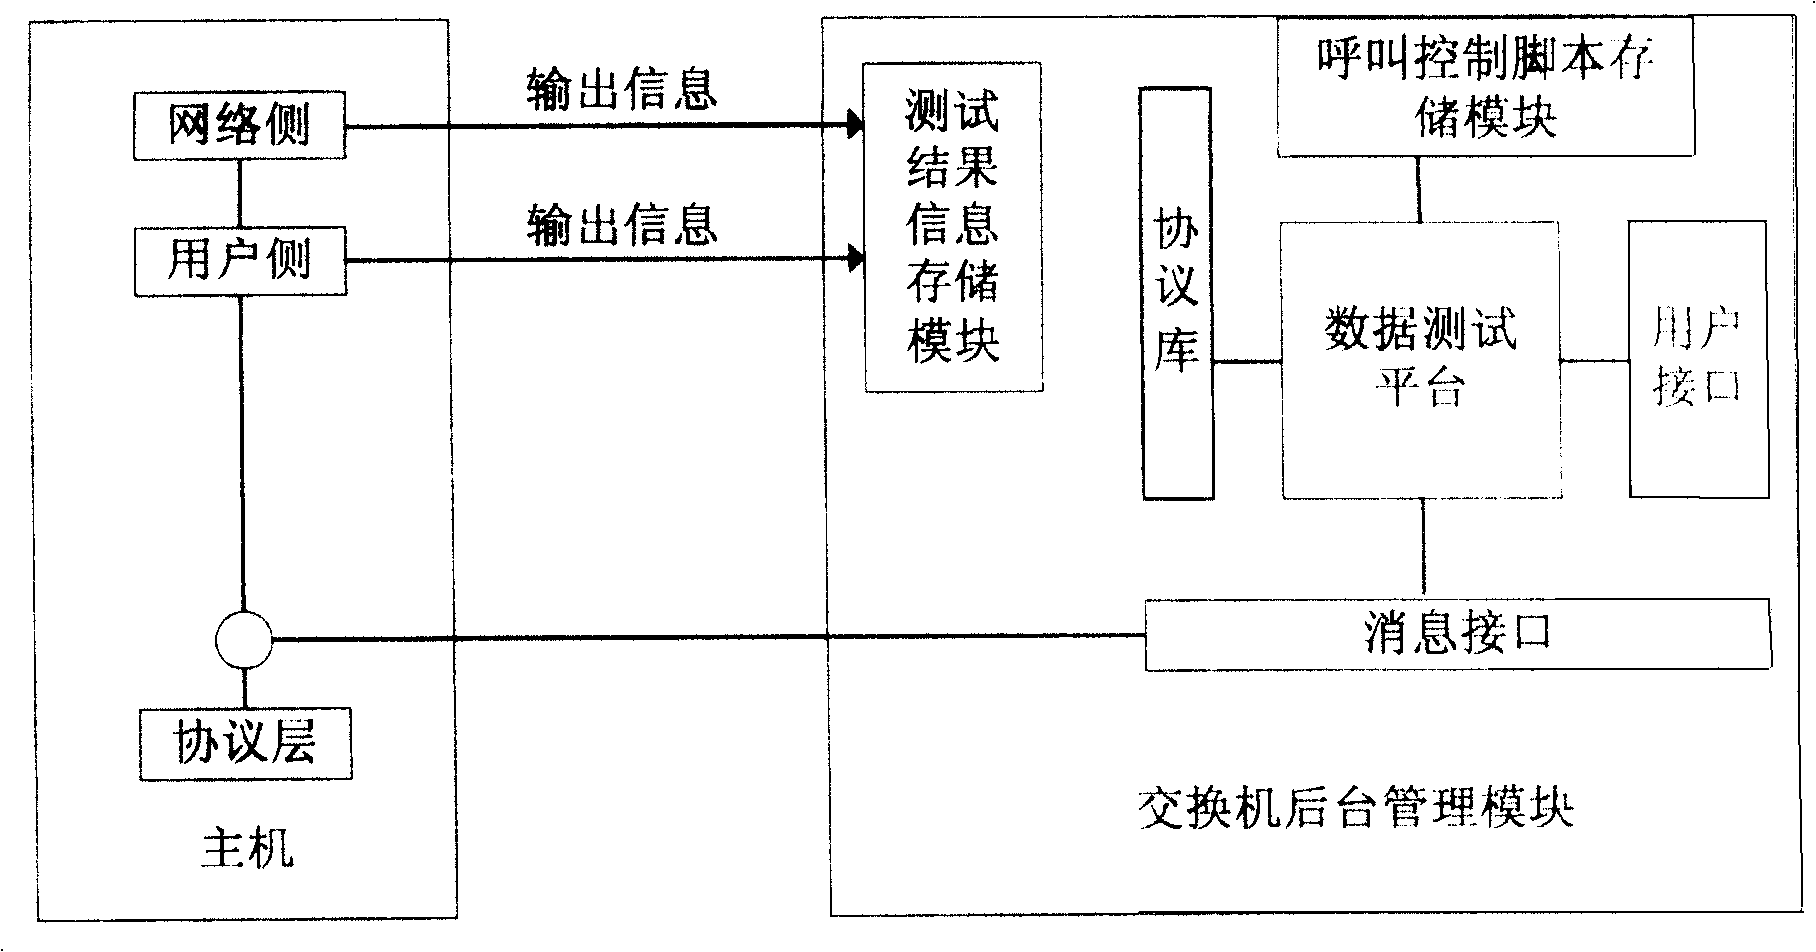 Exchange data testing system and method